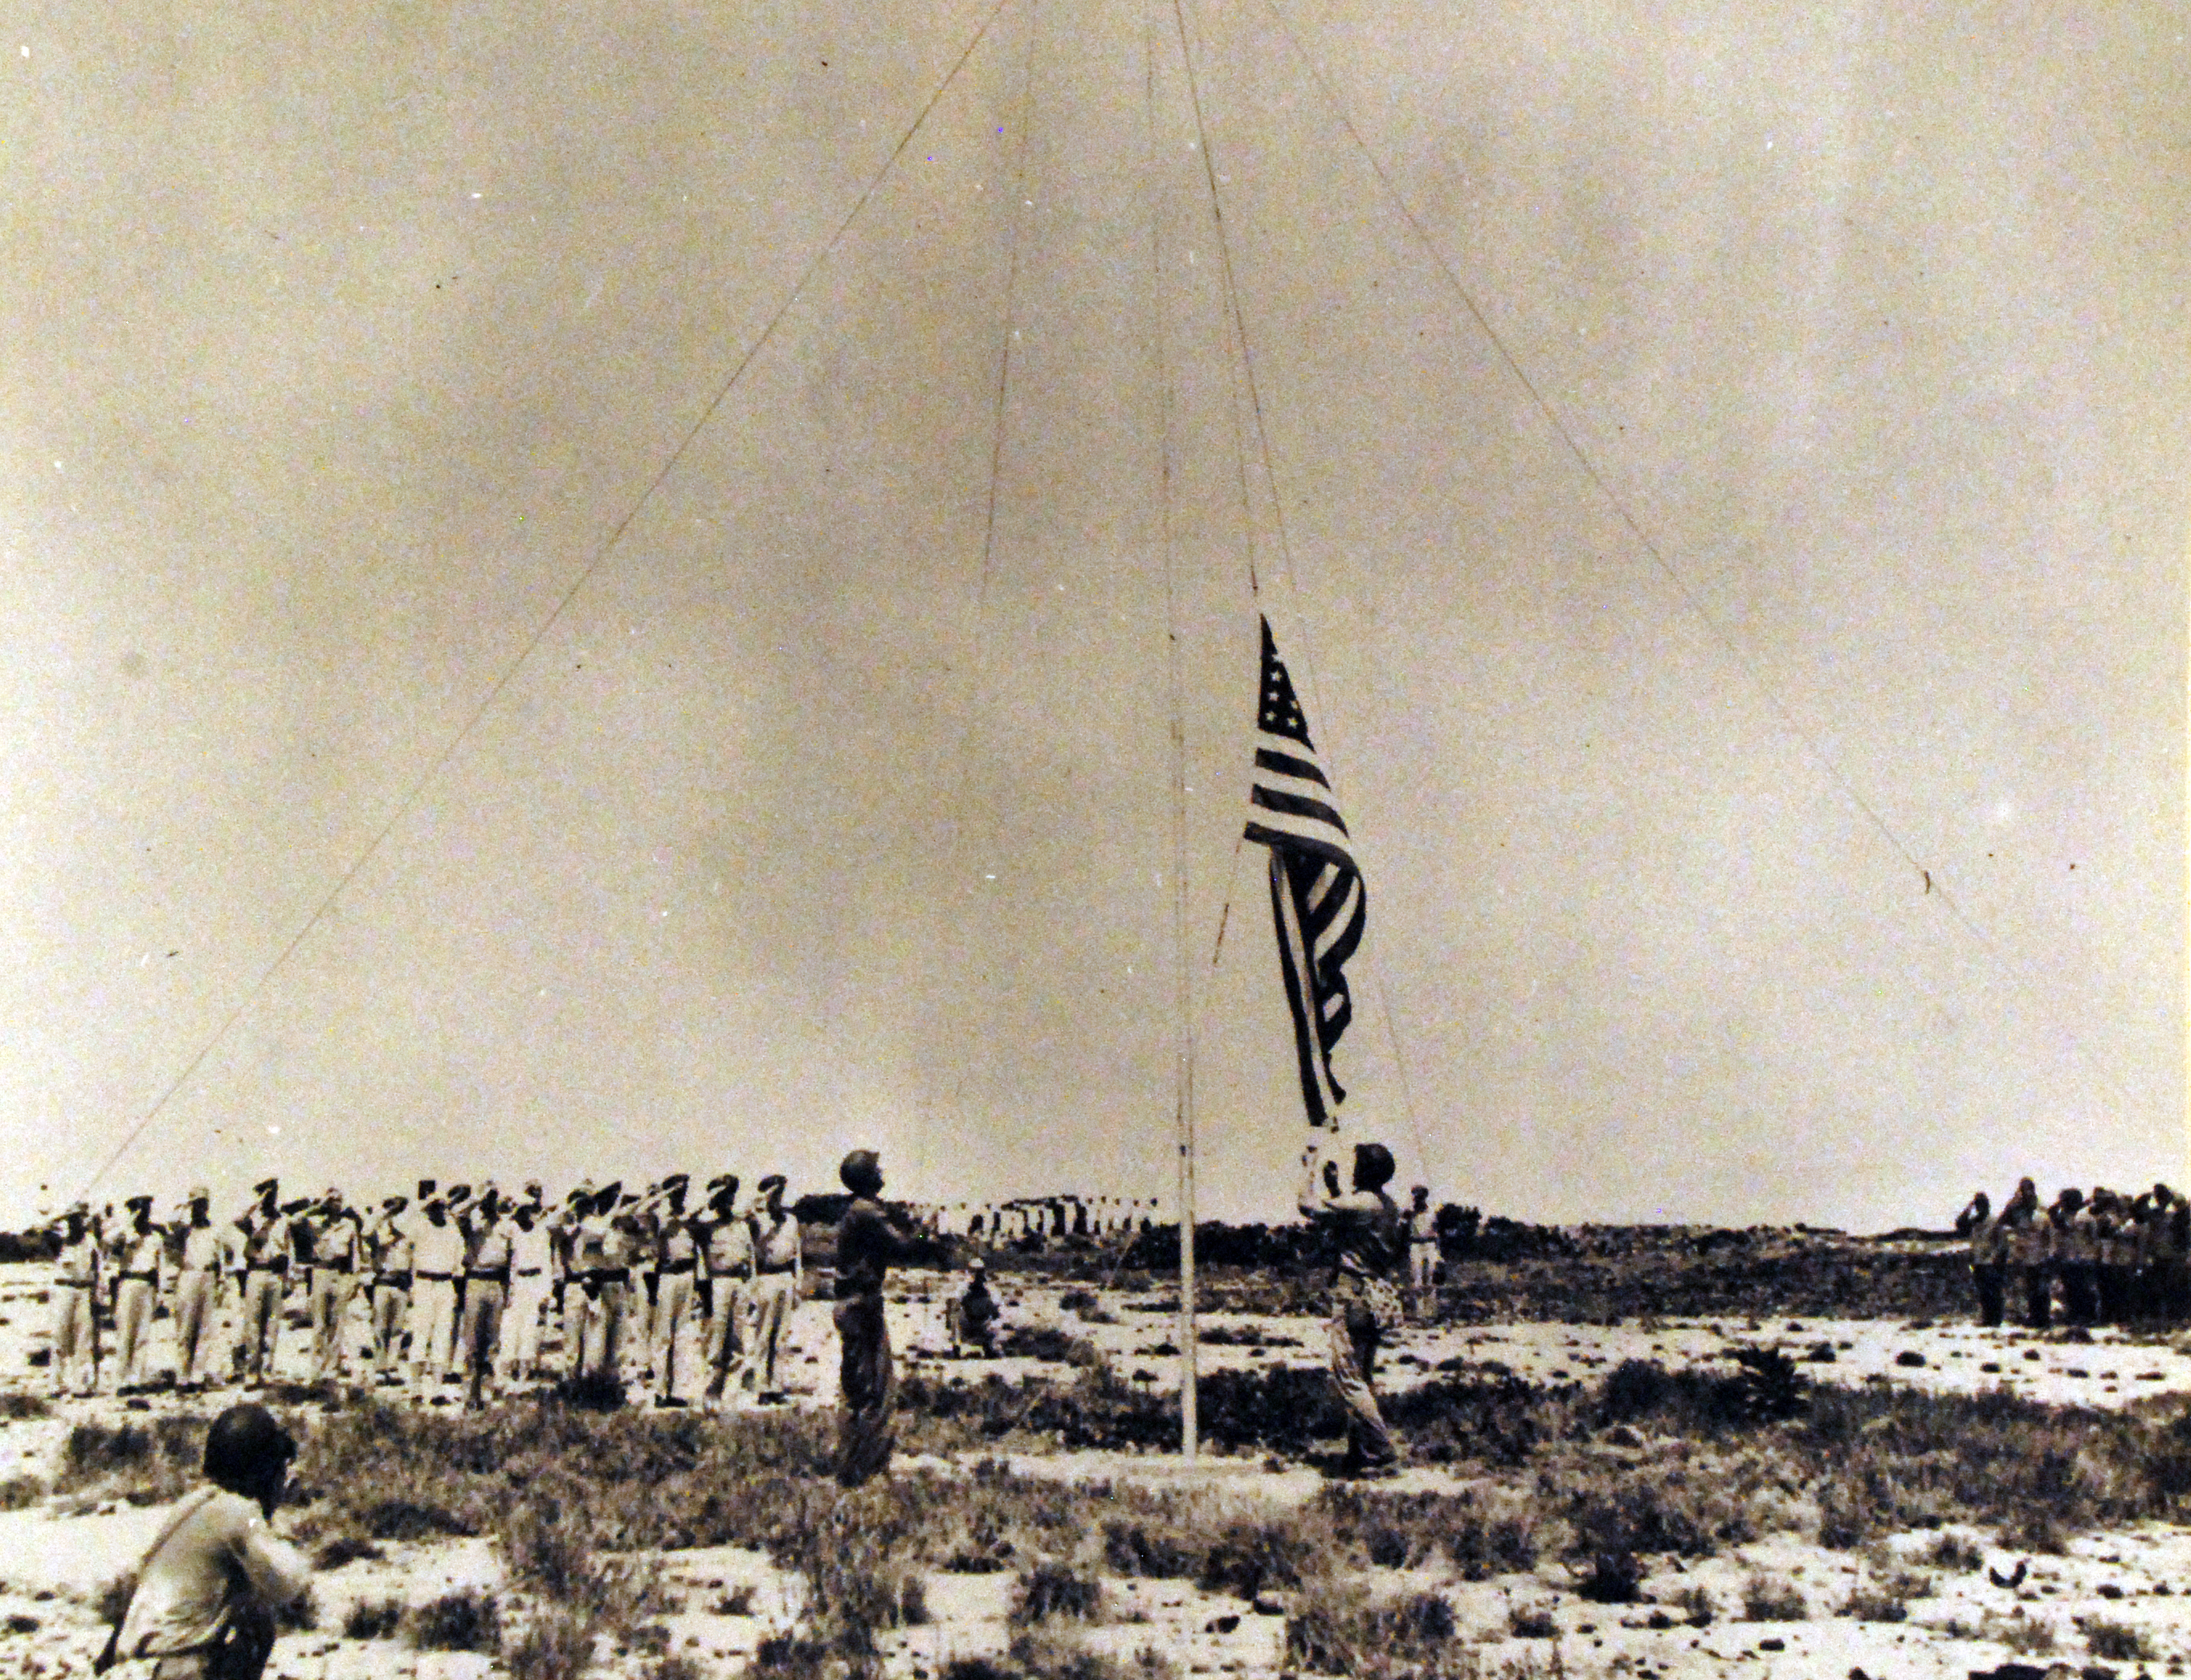 US flag raising, Mili, Marshall islands, Aug-Sep 1945; note Japanese officers at right of photograph